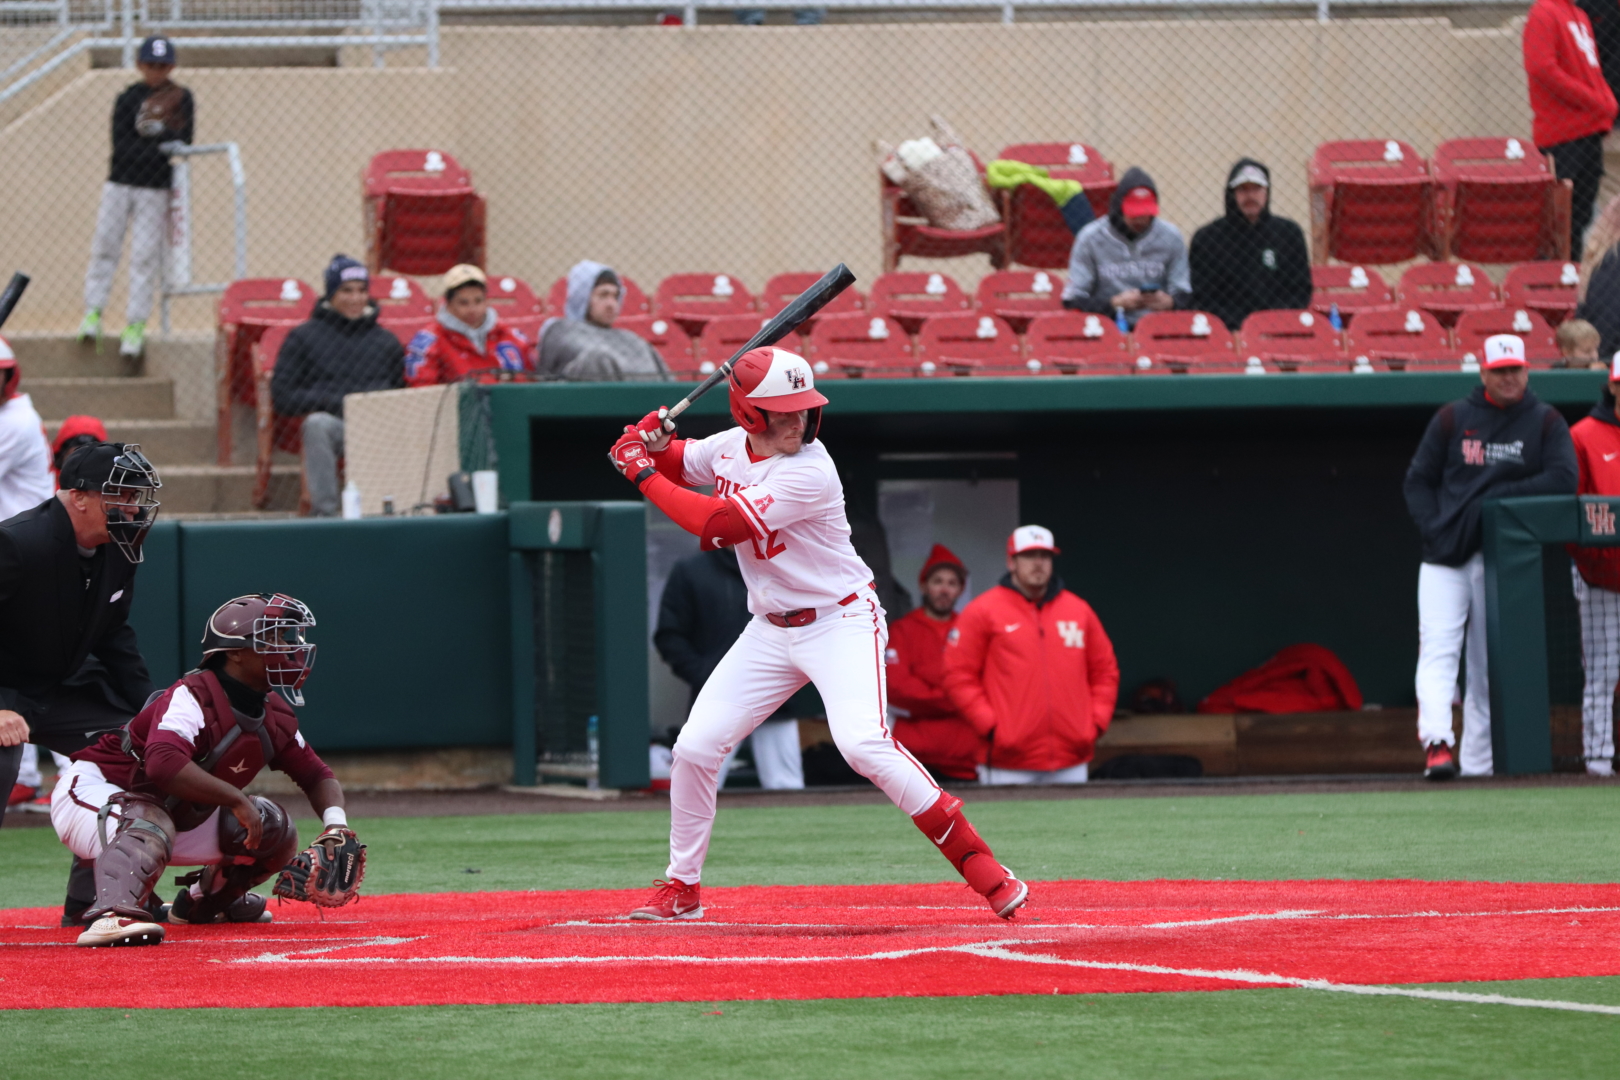 UH baseball shortstop Ian McMillan's bases-clearing triple in the top of the eighth broke the game open in the Cougars' win over Texas A&M on Tuesday night. | James Mueller/The Cougar